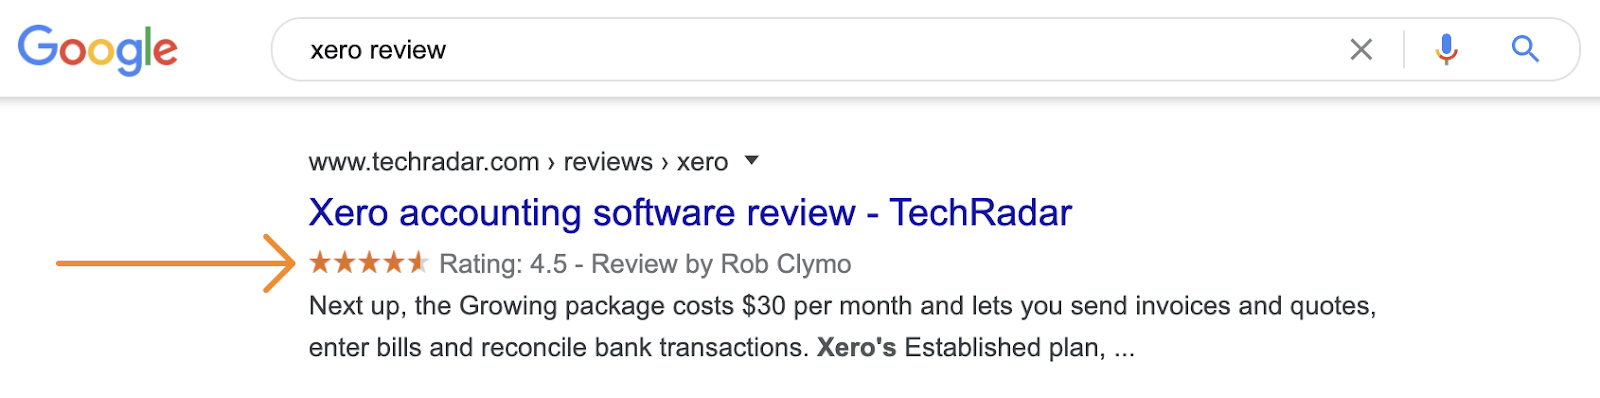 15 xero review rich snippets